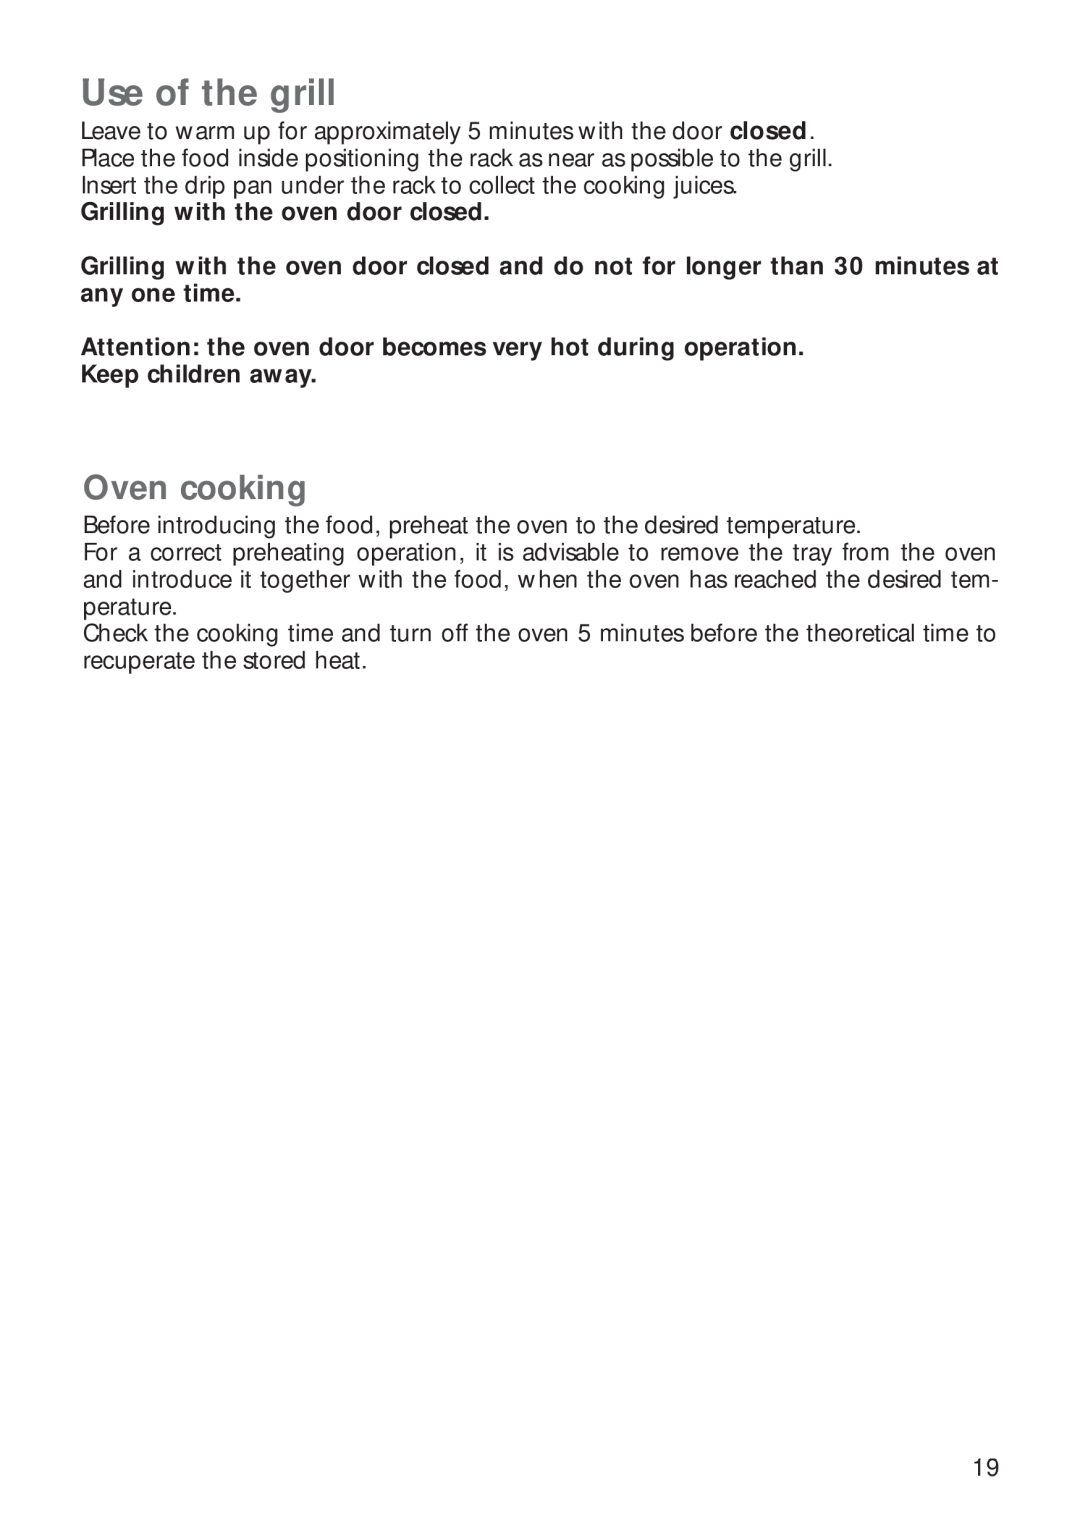 CDA RV 700 installation instructions Use of the grill, Oven cooking 